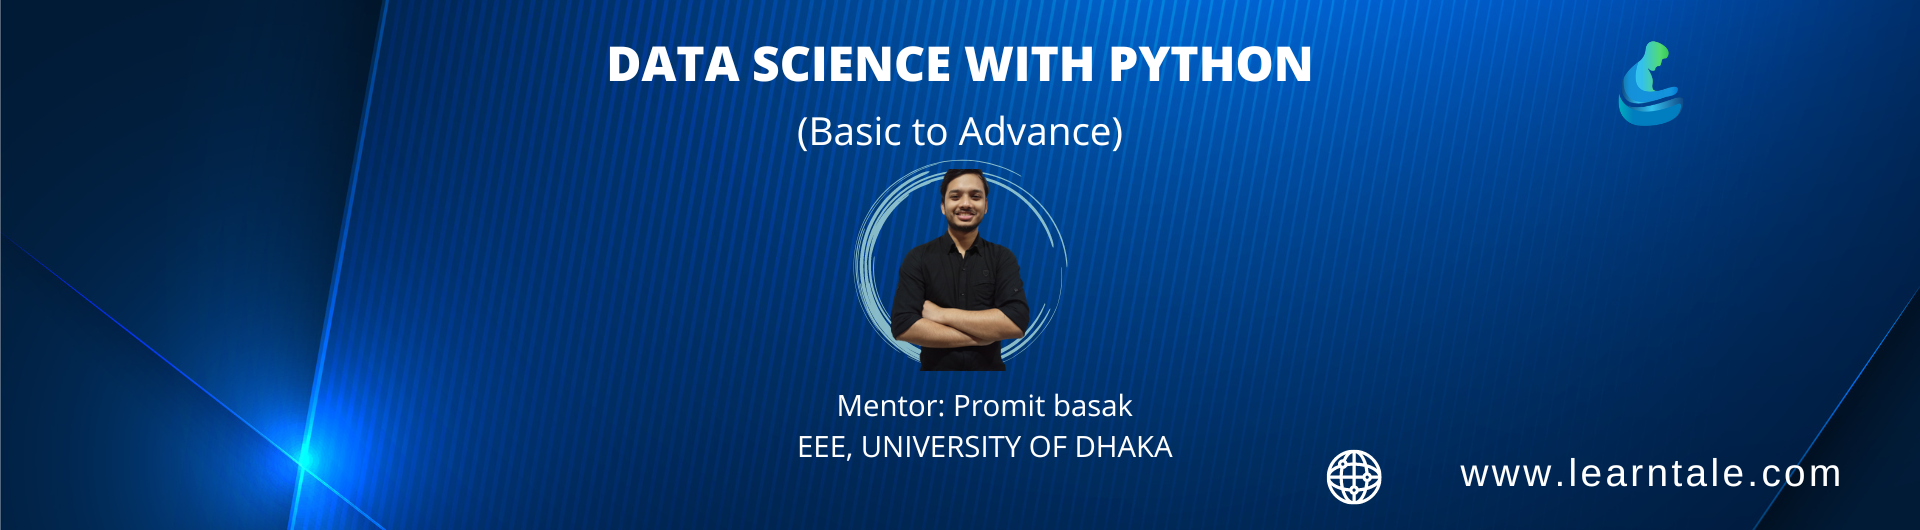 Data Science With Python